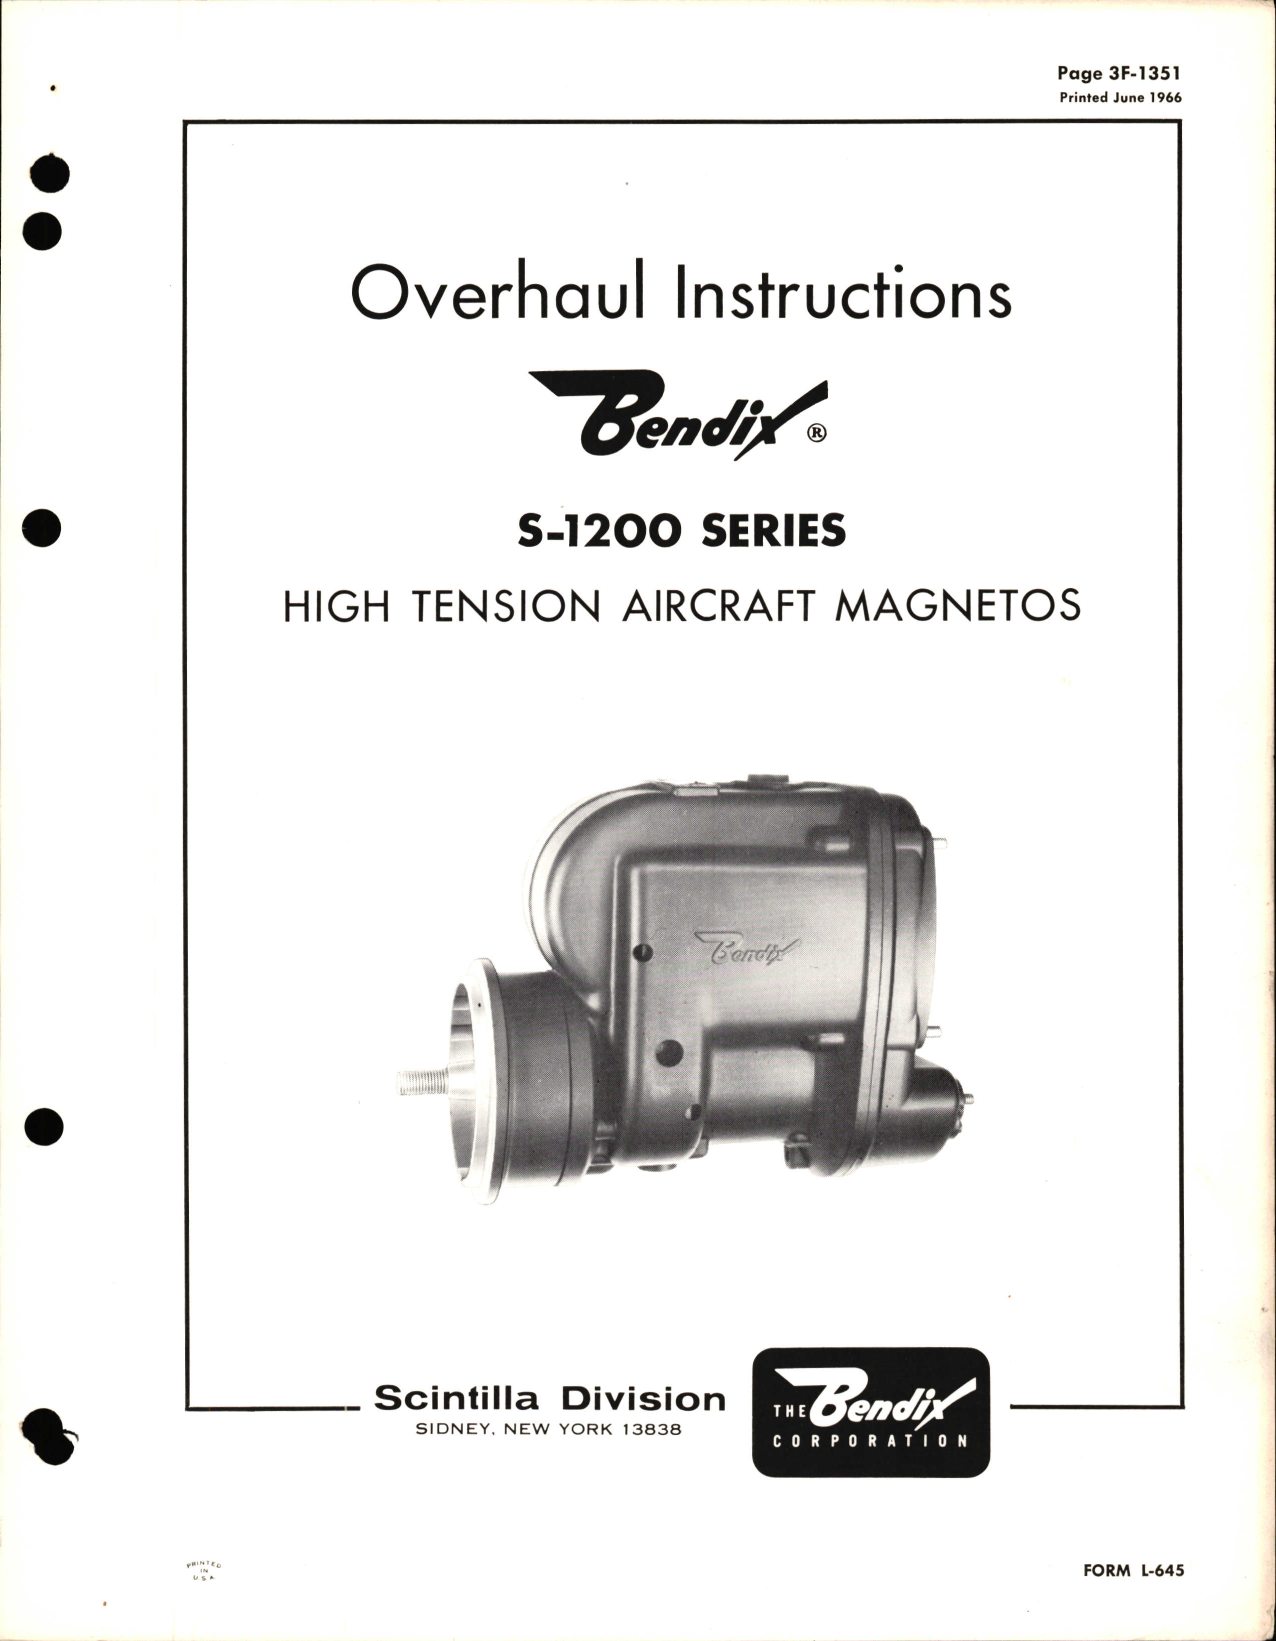 Sample page 1 from AirCorps Library document: Overhaul Instructions for S-1200 Series High Tension Aircraft Magnetos